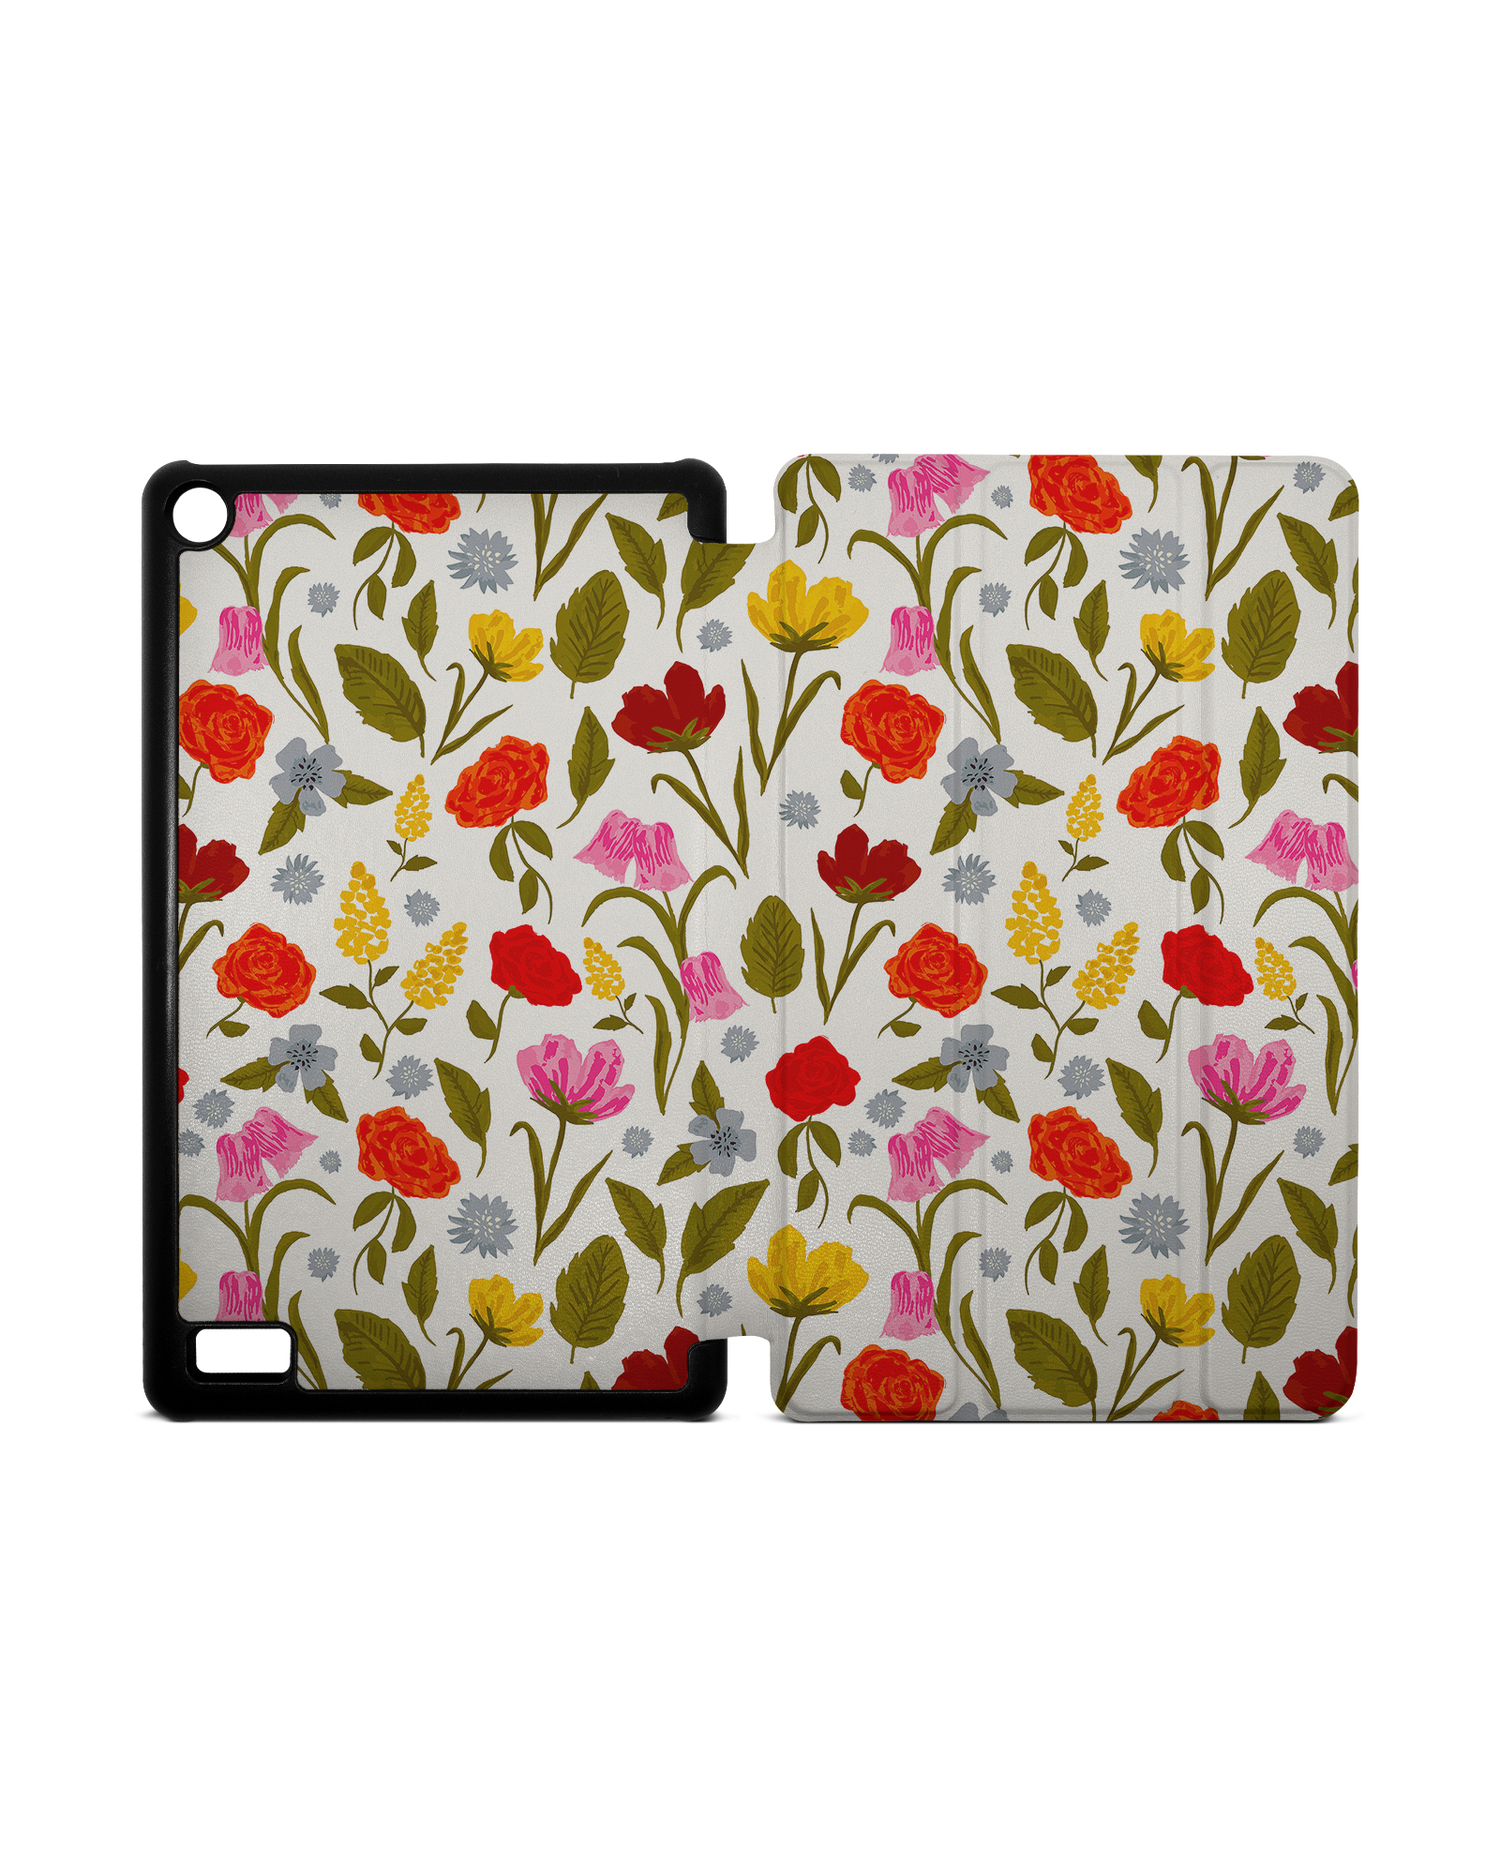 Botanical Beauties Tablet Smart Case for Amazon Fire 7: Opened